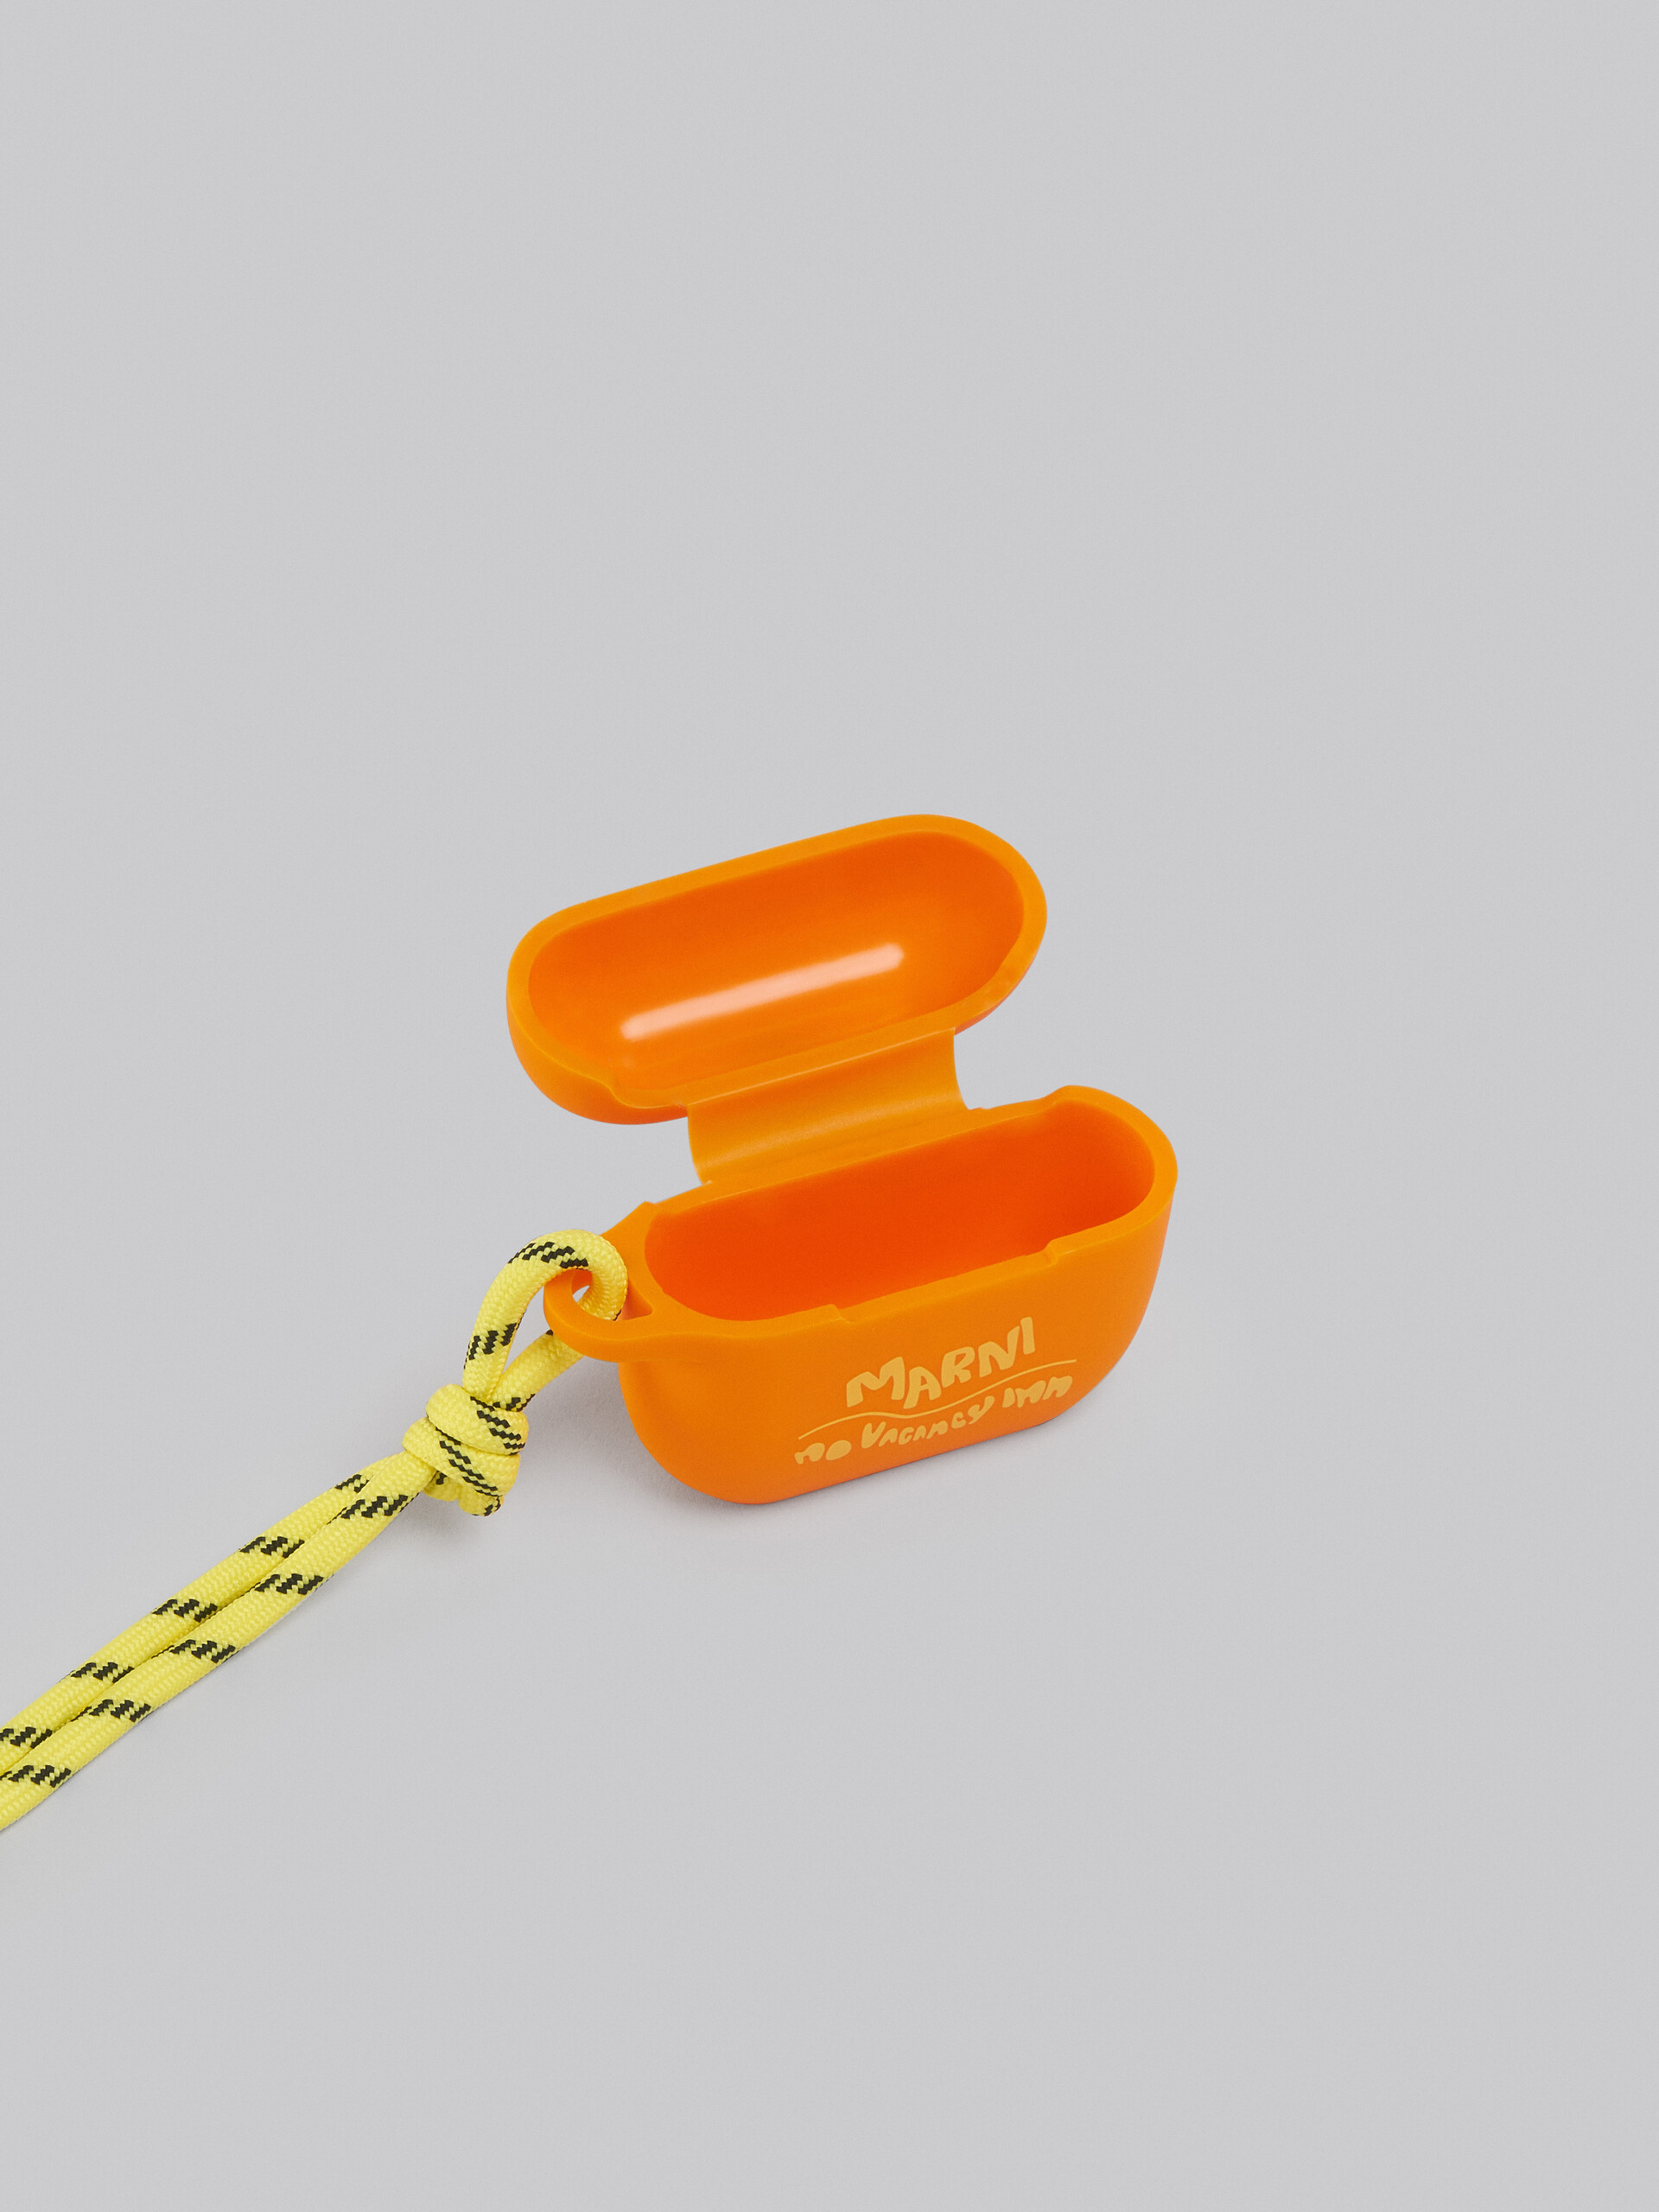 Marni x No Vacancy Inn - Orange and yellow Airpods case - Other accessories - Image 3